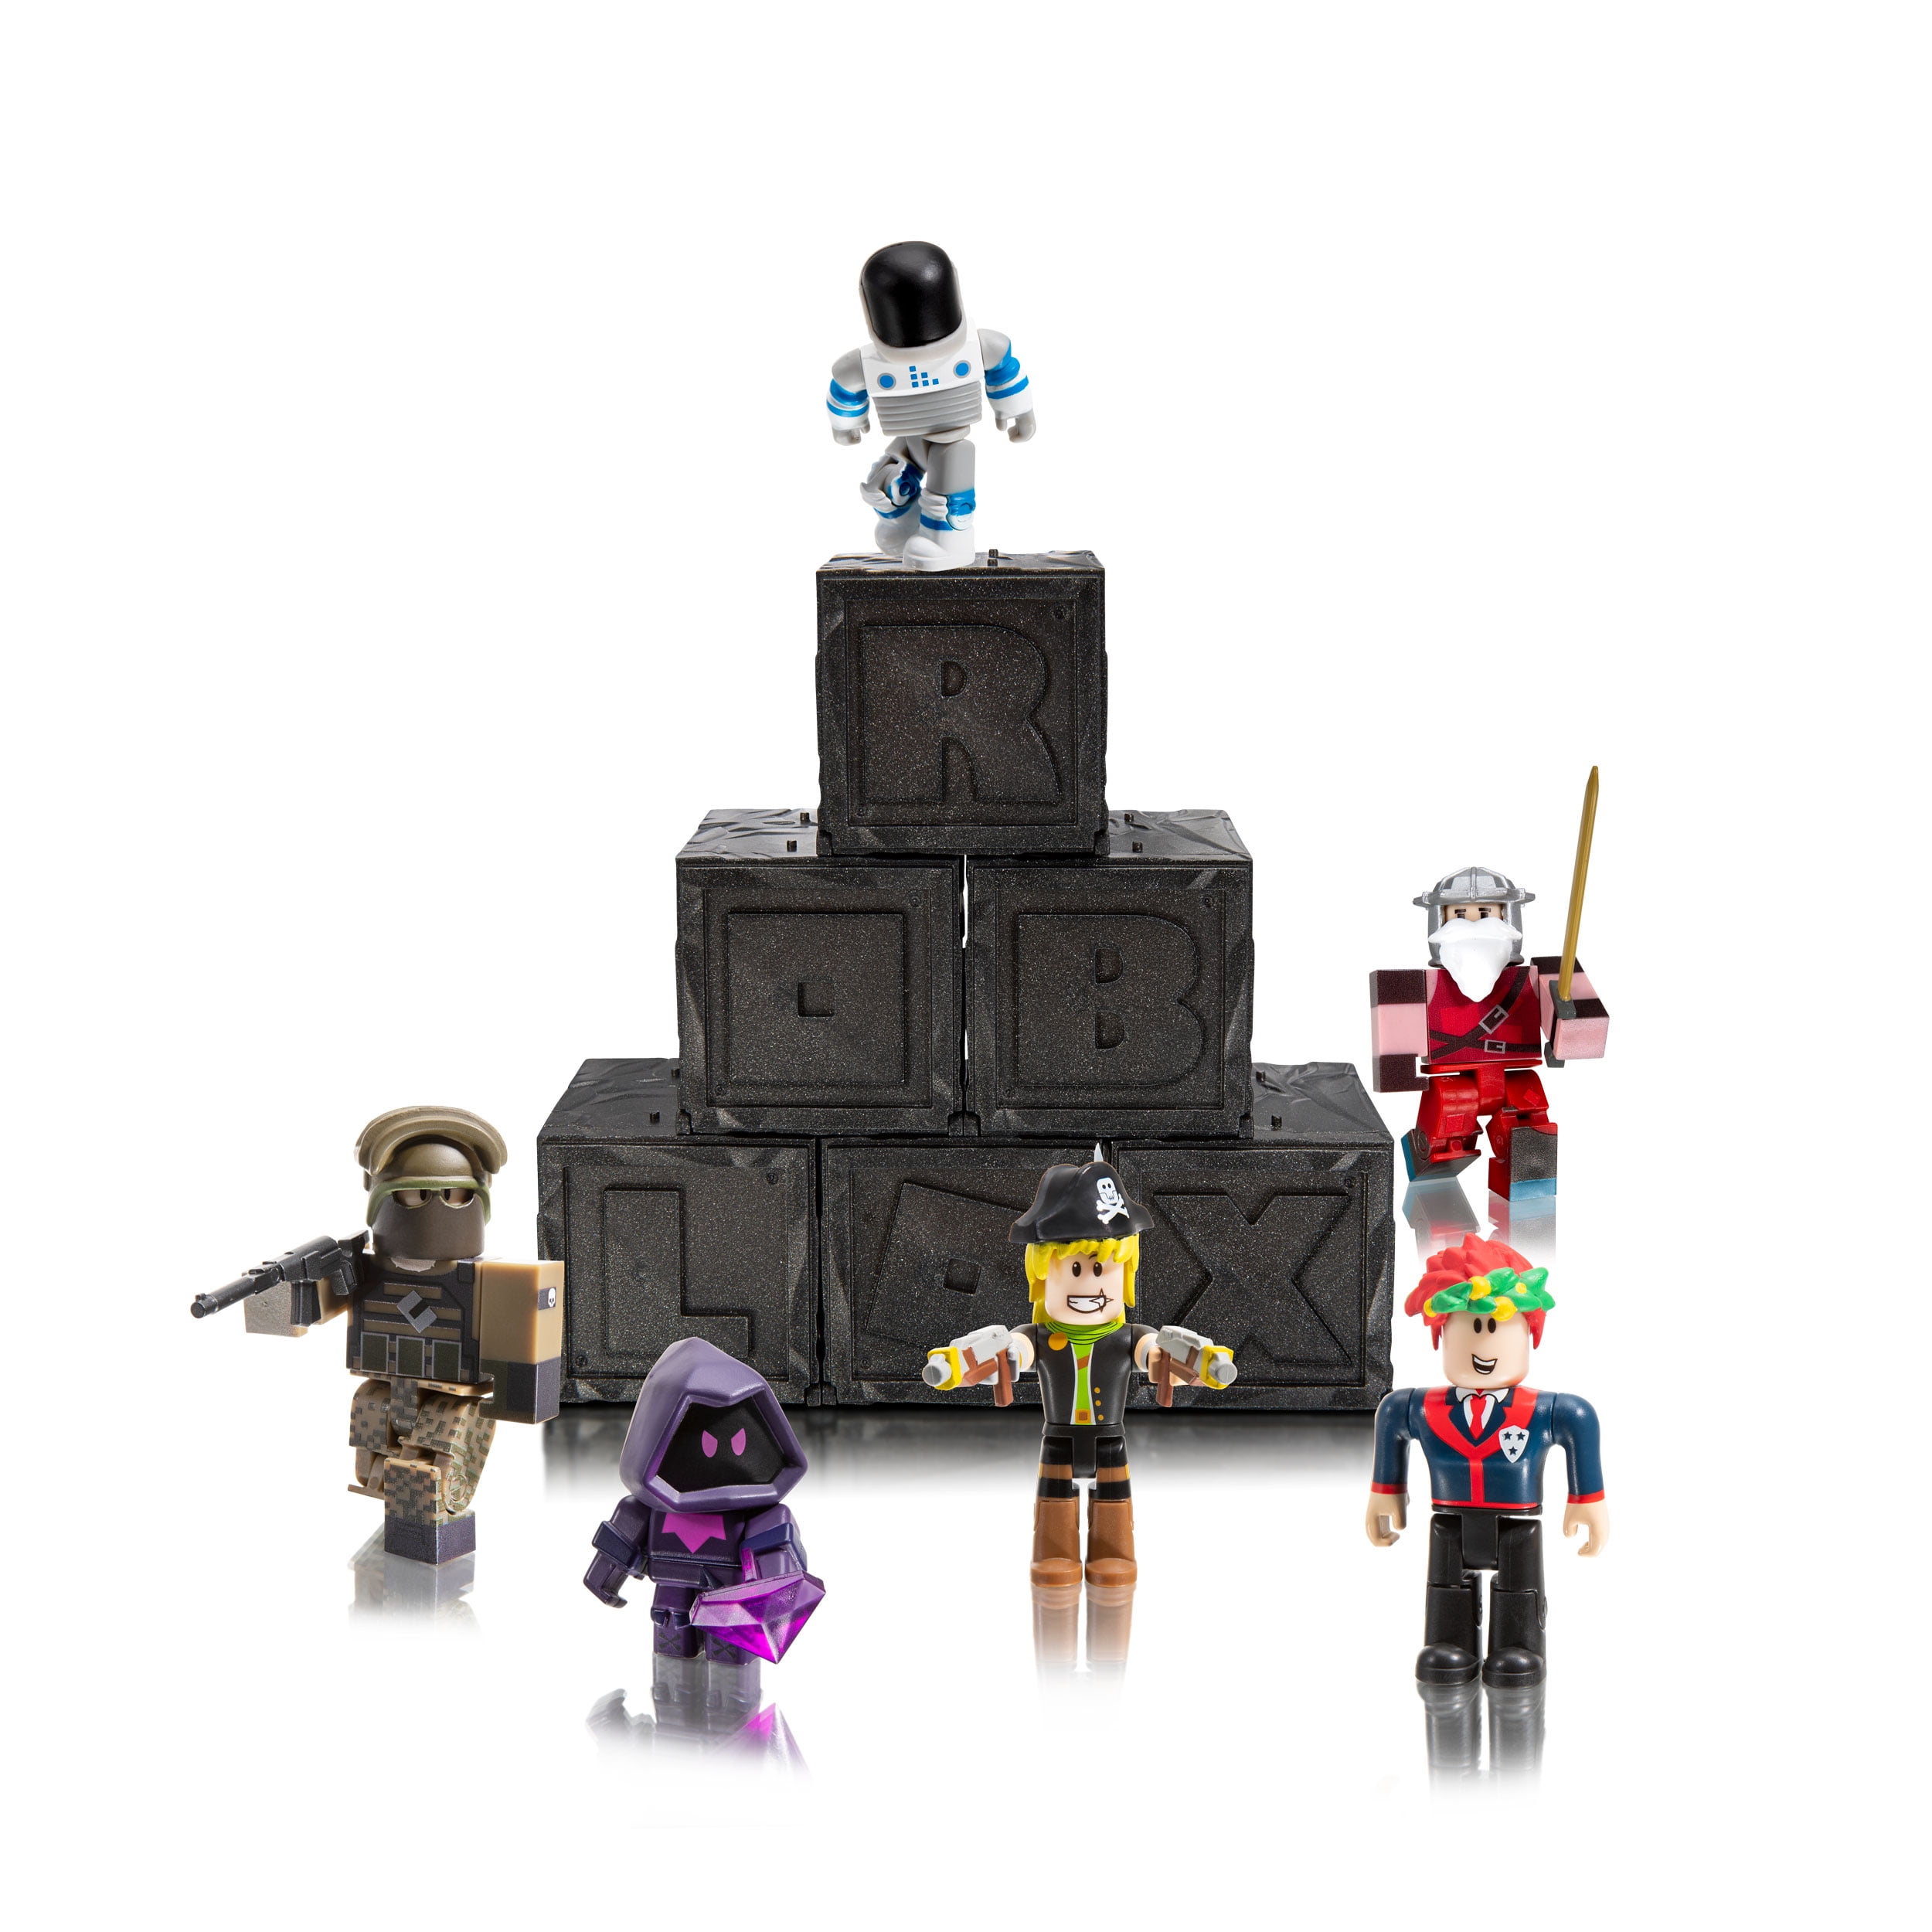 Roblox Action Collection Series 7 Mystery Figure Includes 1 Figure Exclusive Virtual Item Walmart Com Walmart Com - roblox action collection series 6 mystery figure includes 1 figure exclusive virtual item walmart com walmart com